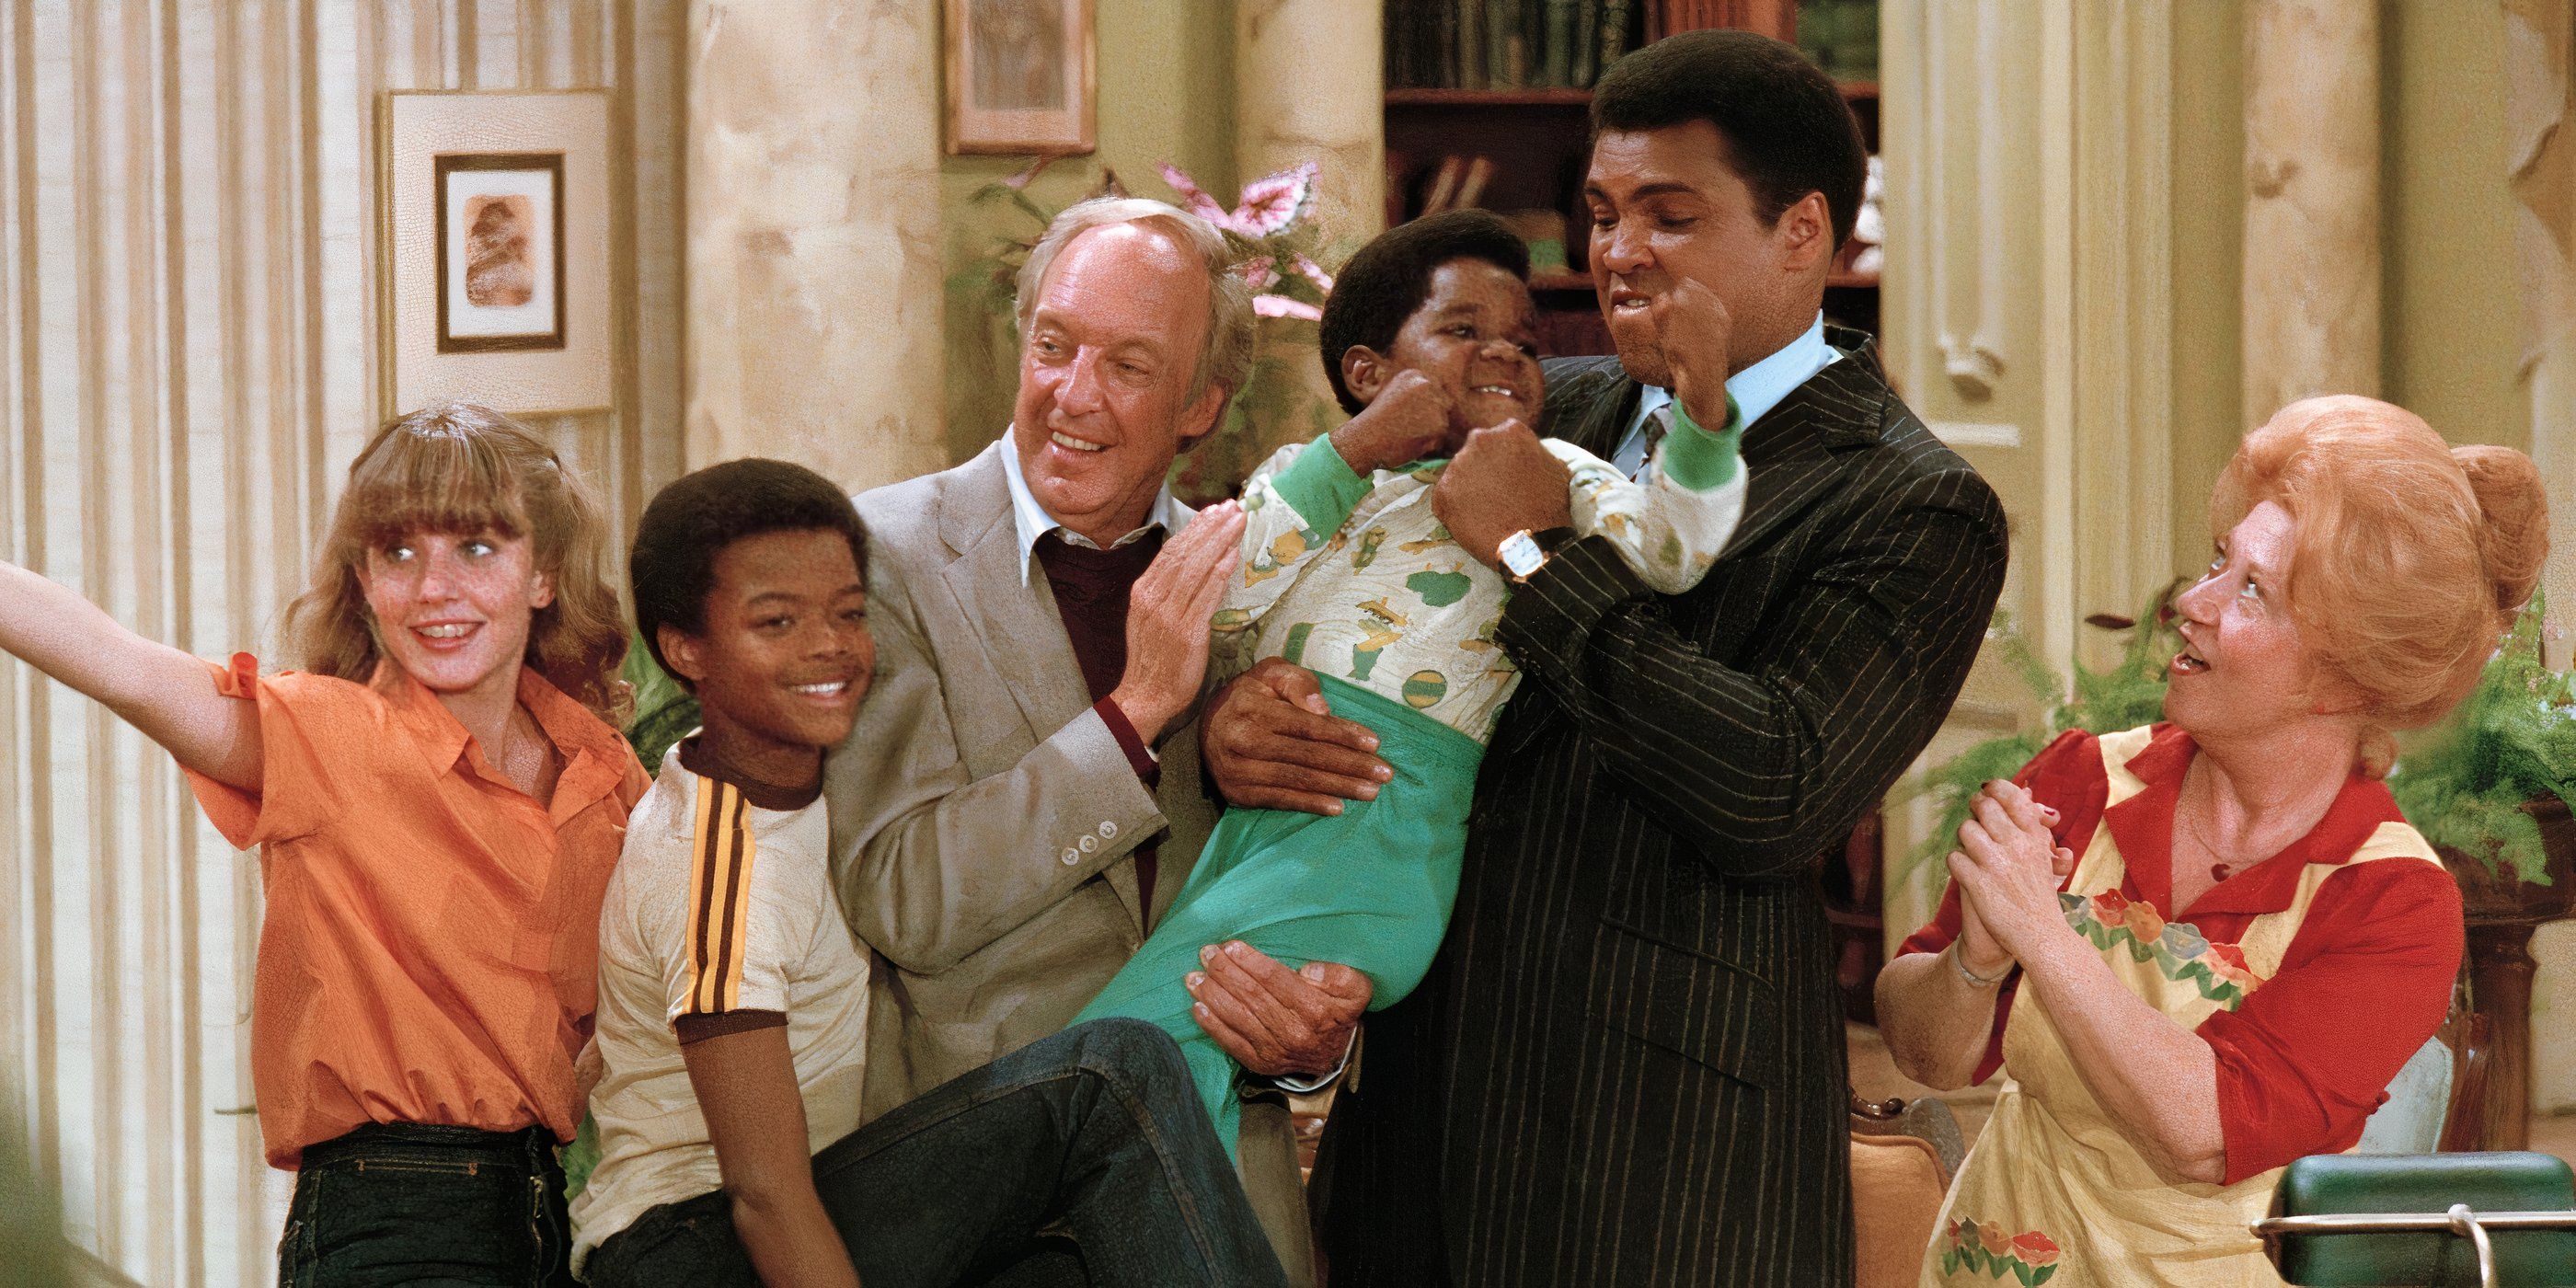 The cast of 'Diff'rent Strokes'